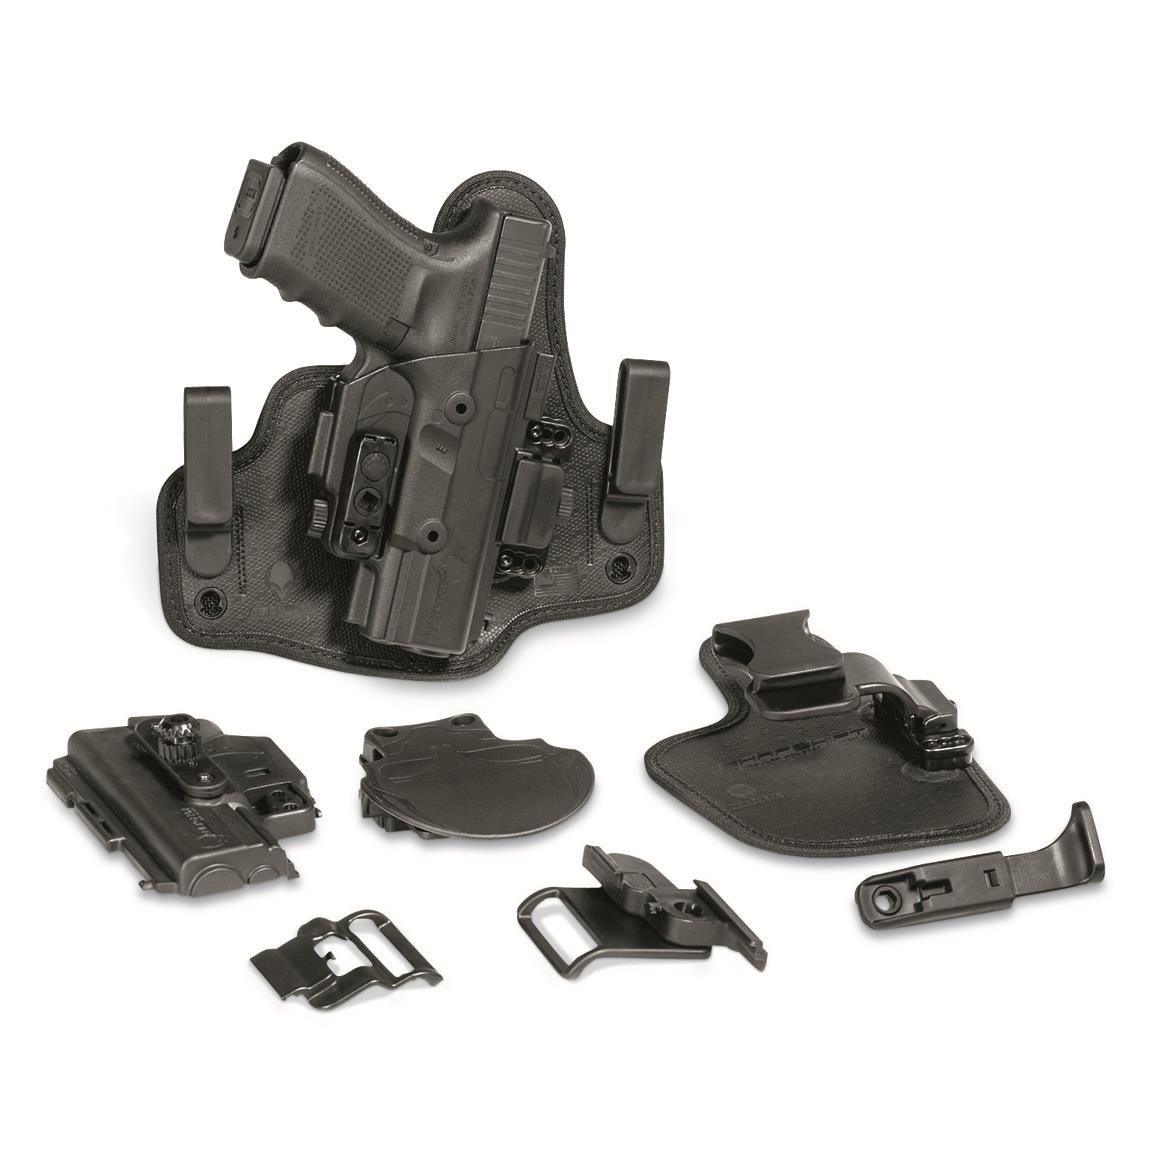 Alien Gear ShapeShift Holster Core Carry Pack, Smith & Wesson M&P Shield 2.0 9mm